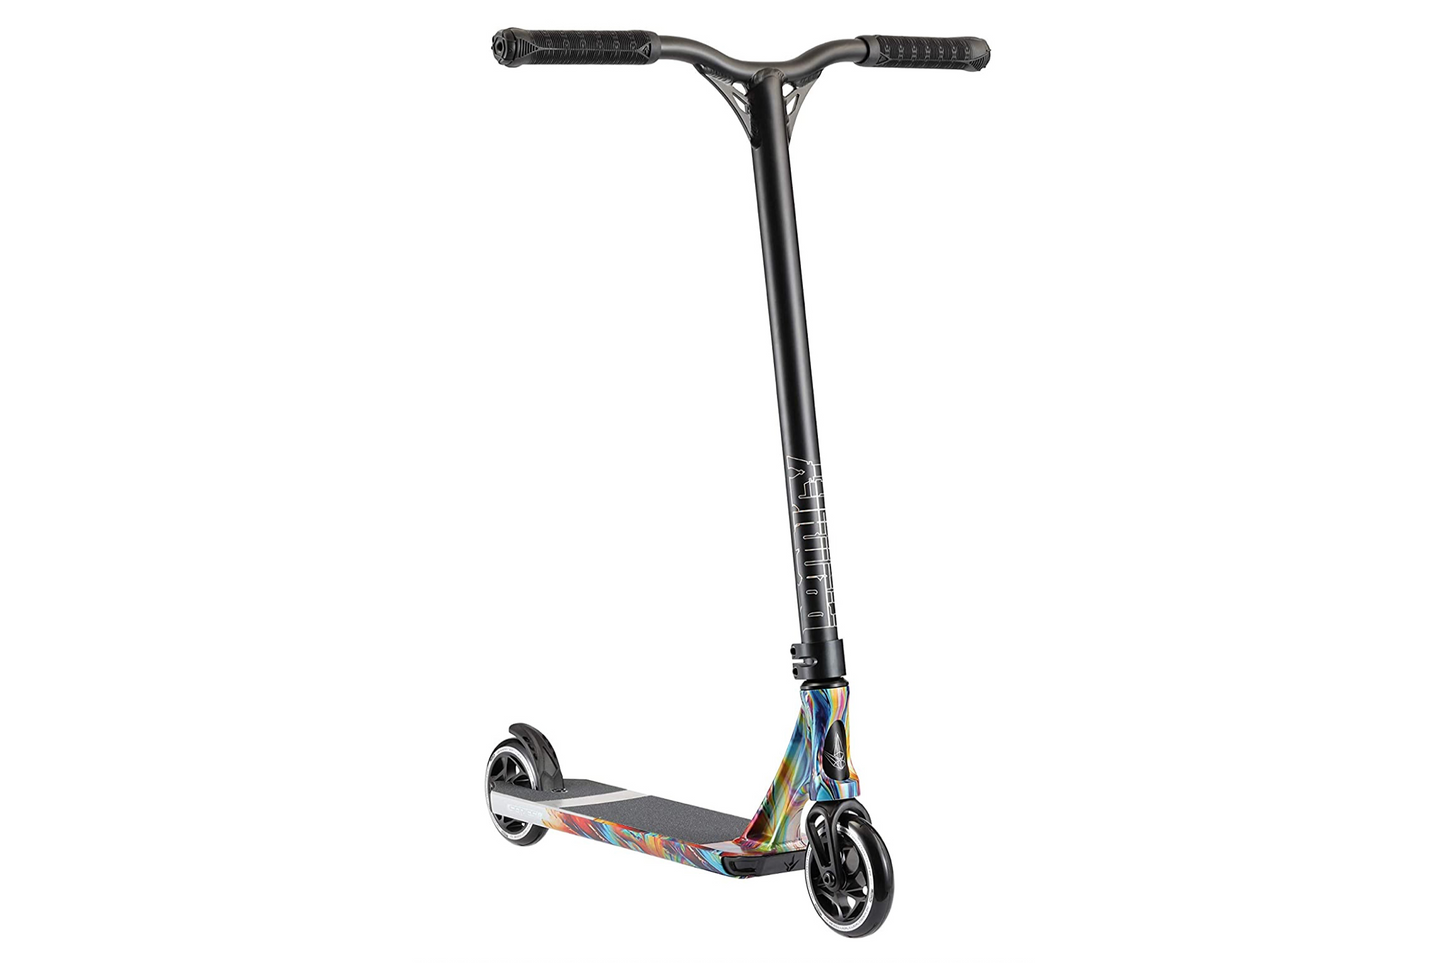 envy-complete-prodigy-s8-swirl-trottinette-scooter